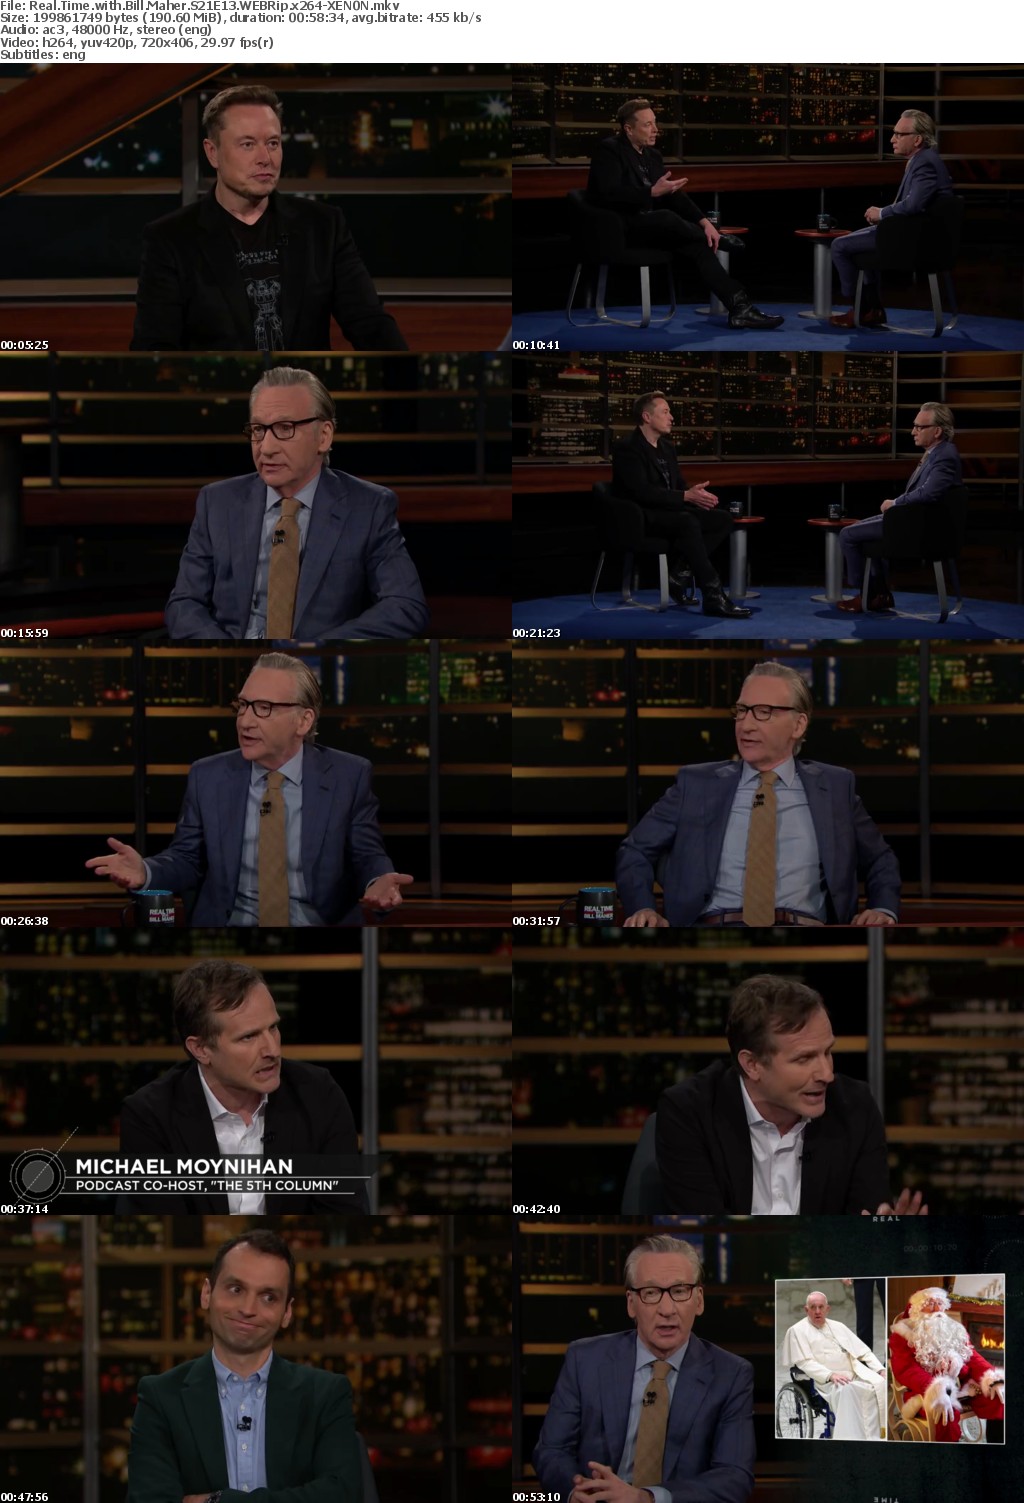 Real Time with Bill Maher S21E13 WEBRip x264-XEN0N